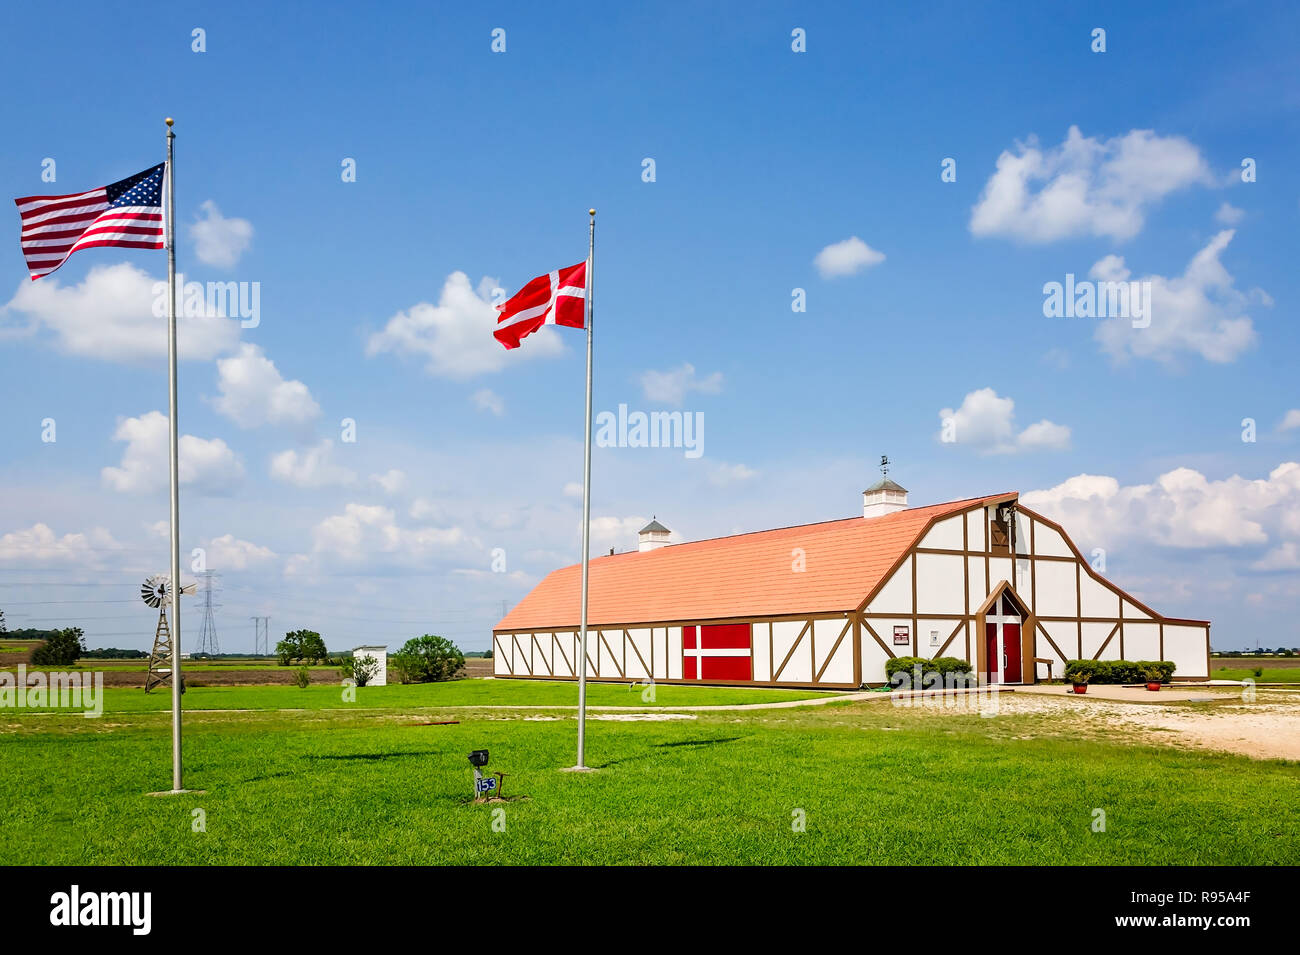 The United States flag and the flag of Denmark fly outside the Danish Heritage Museum, Sept. 3, 2017, in Danevang, Texas. Stock Photo